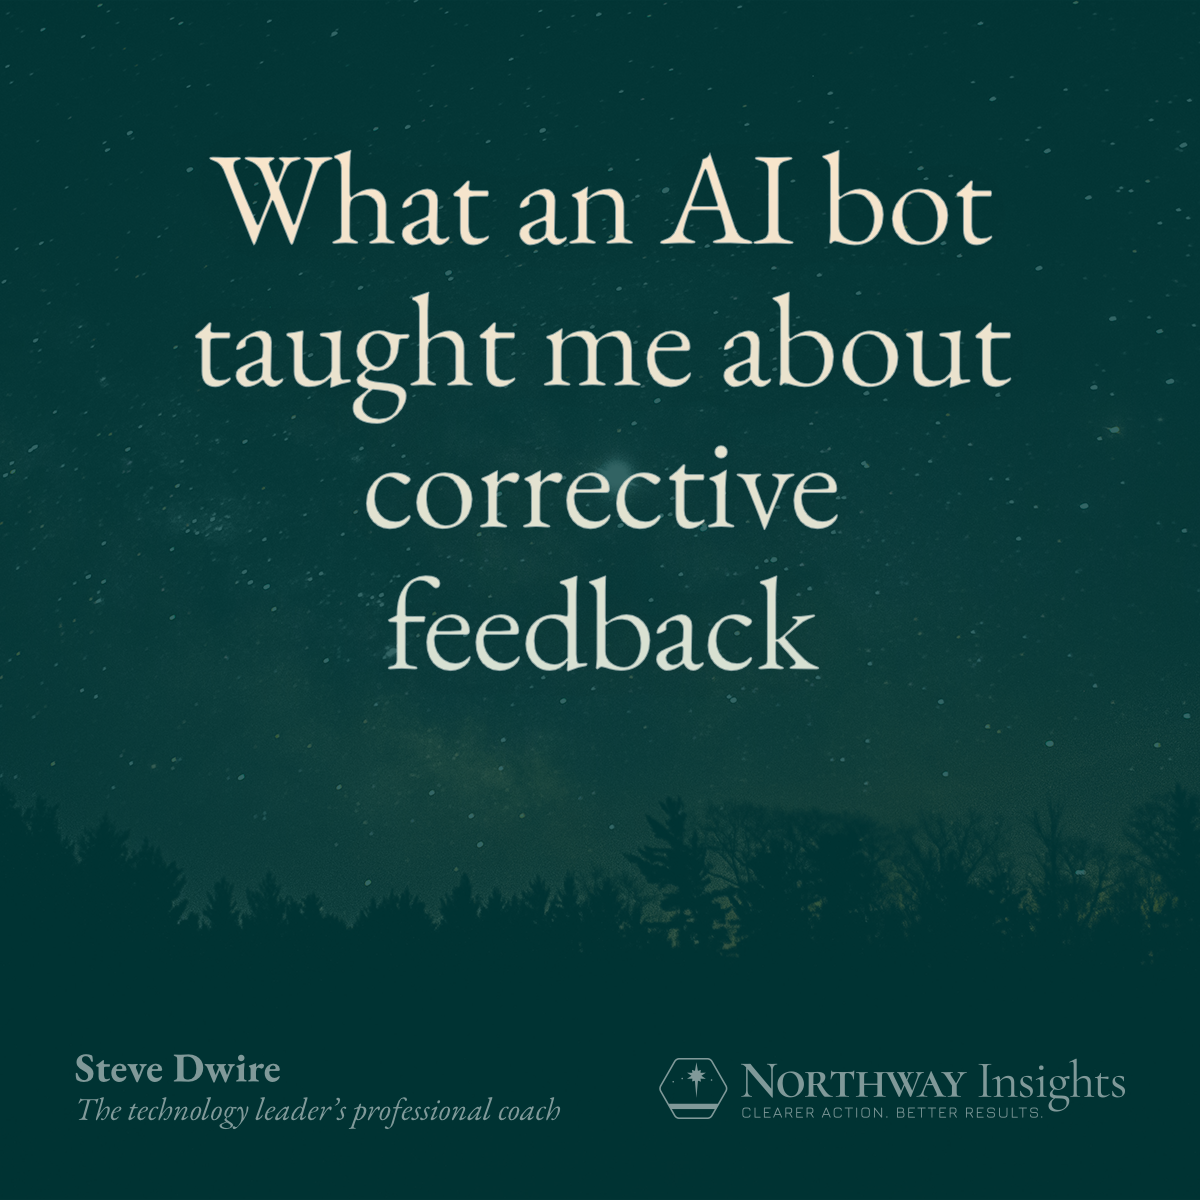 What an AI bot taught me about corrective feedback